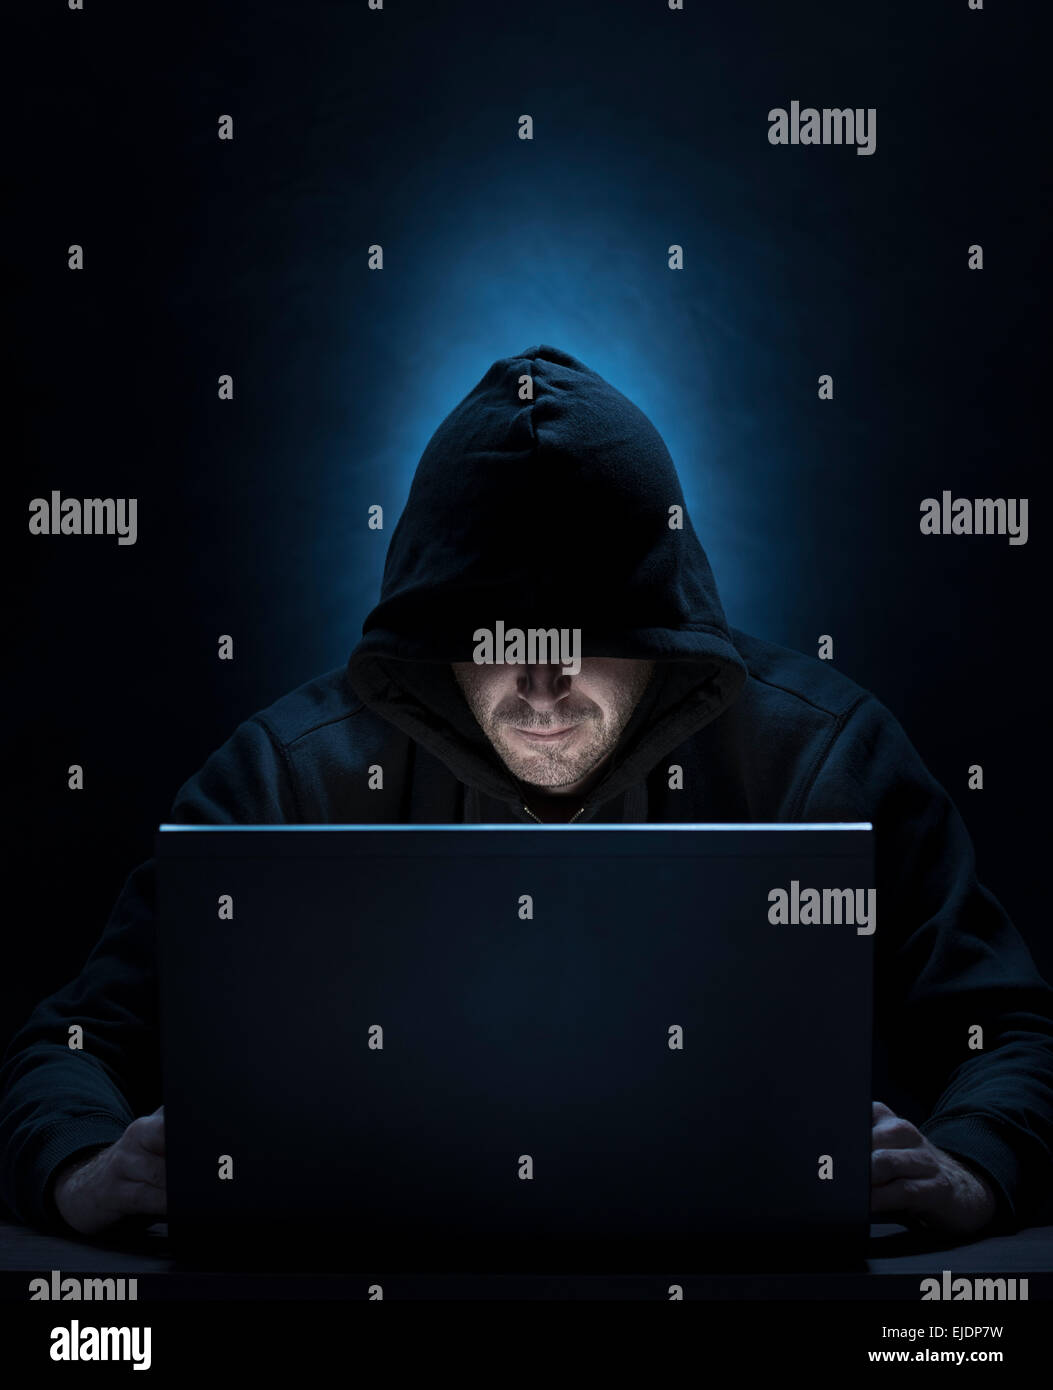 Hooded man on the computer, for hacking,spying,internet security themes Stock Photo